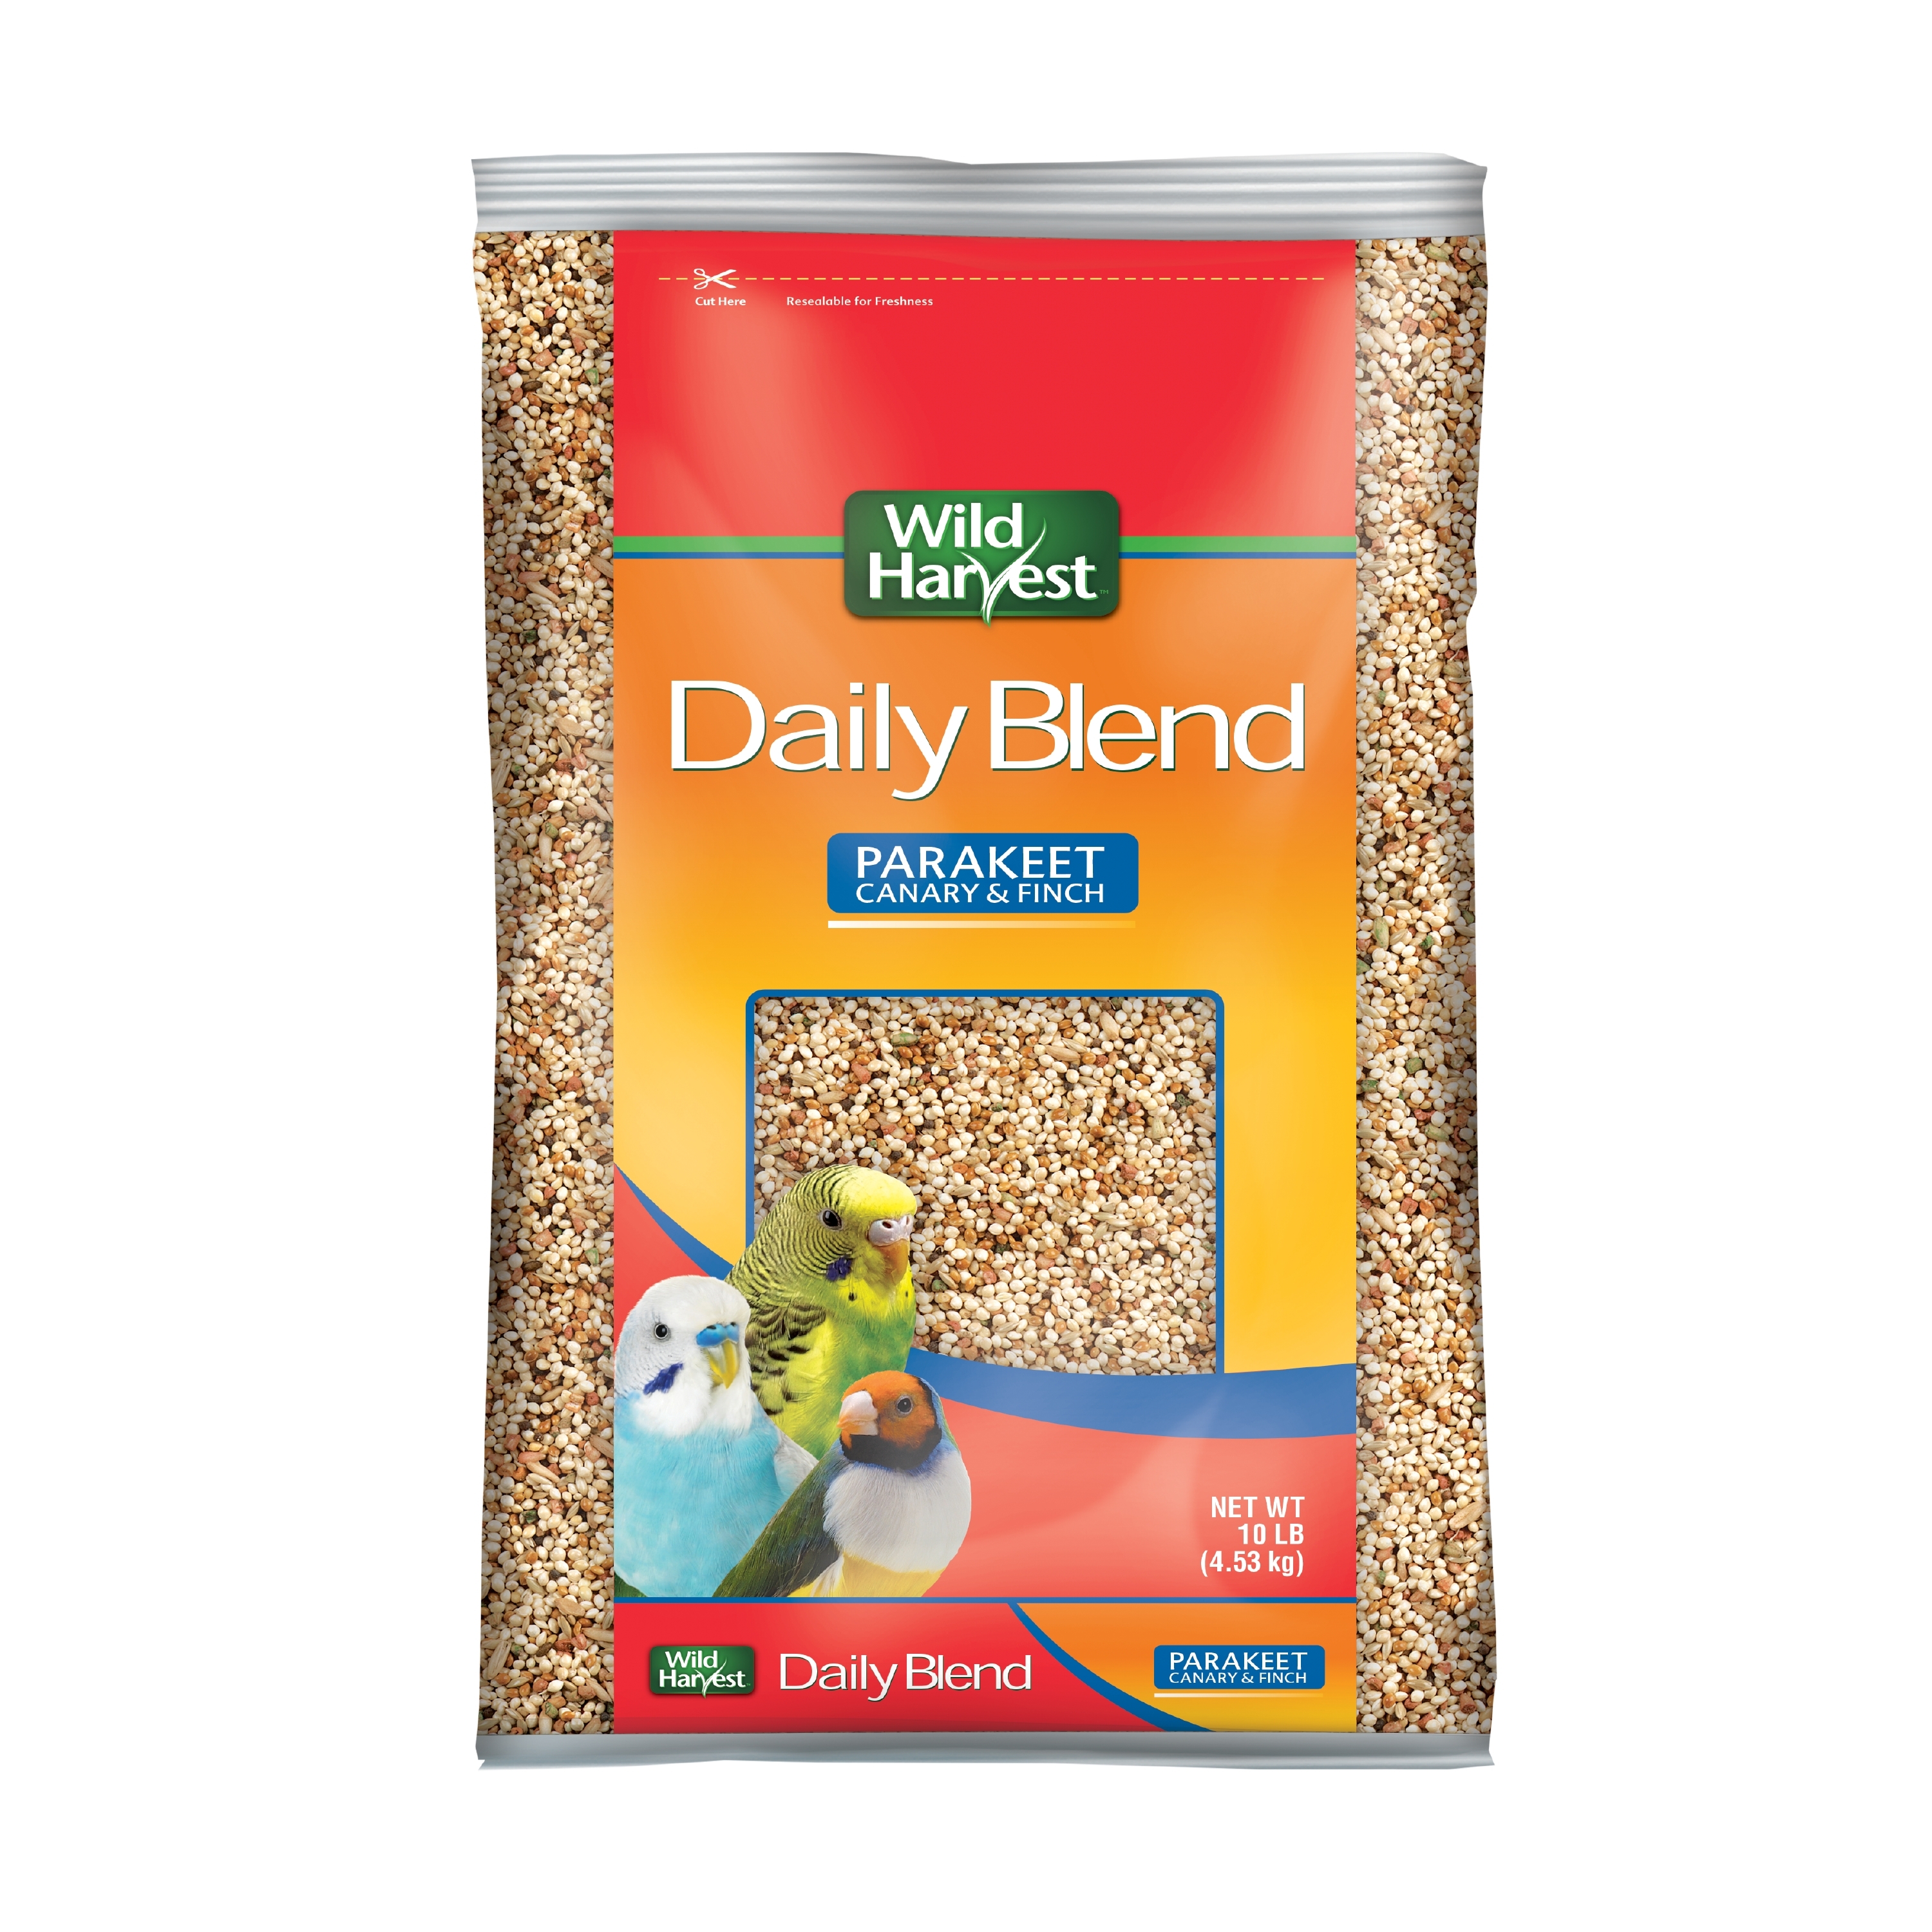 Wild Harvest Daily Blend Nutrition Diet Bird Food for Parakeet, Canary and Finch 10 Pounds - image 1 of 5